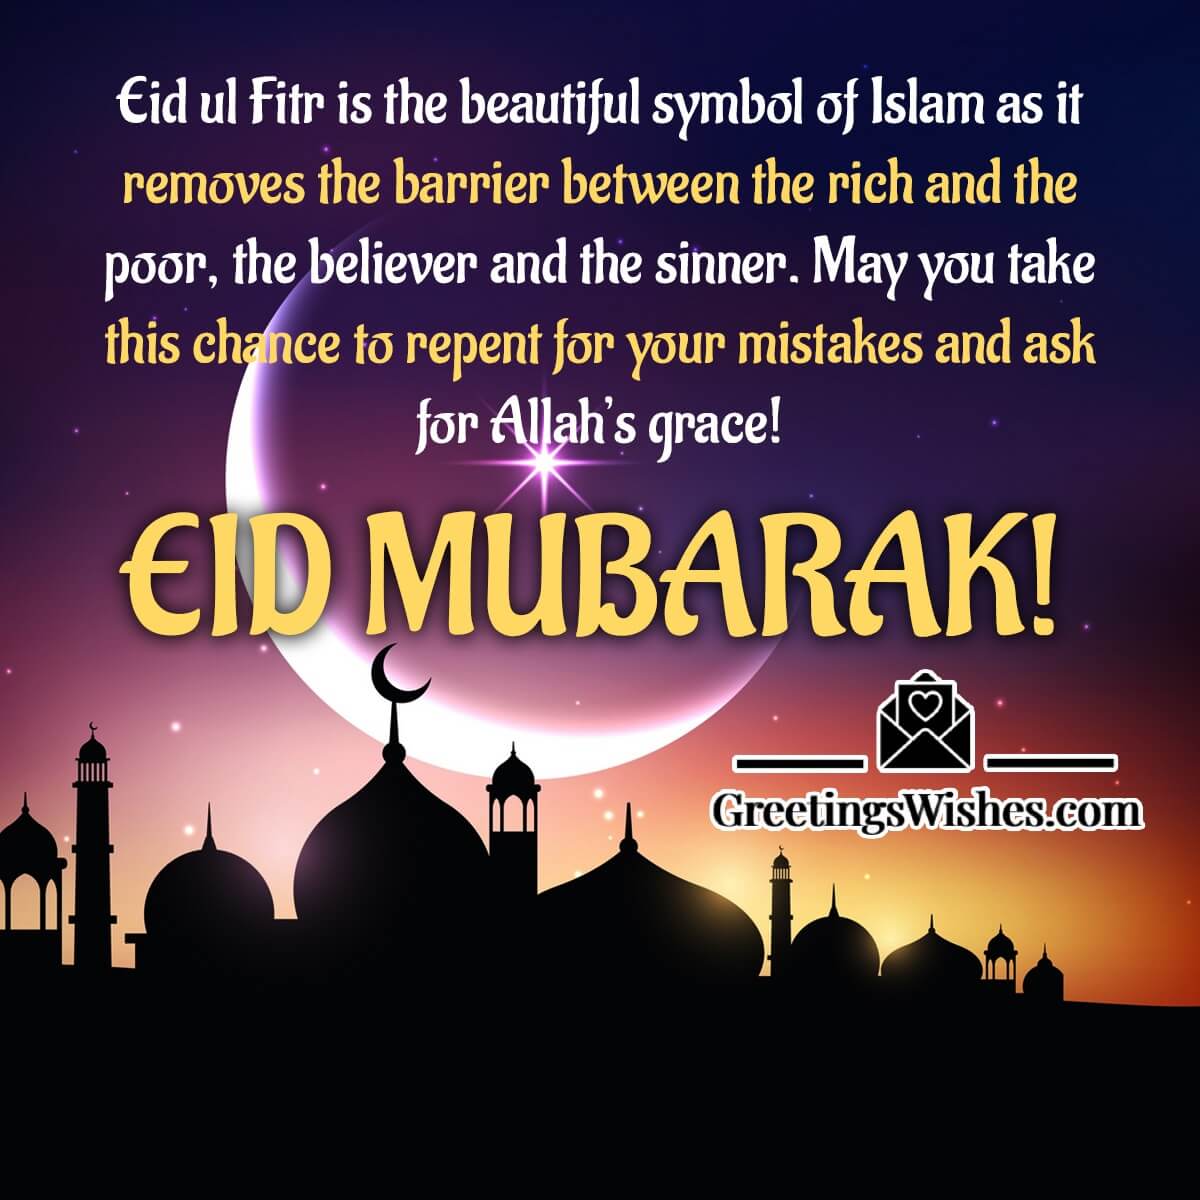 Eid al-Fitr Wishes Messages (10 April) - Greetings Wishes